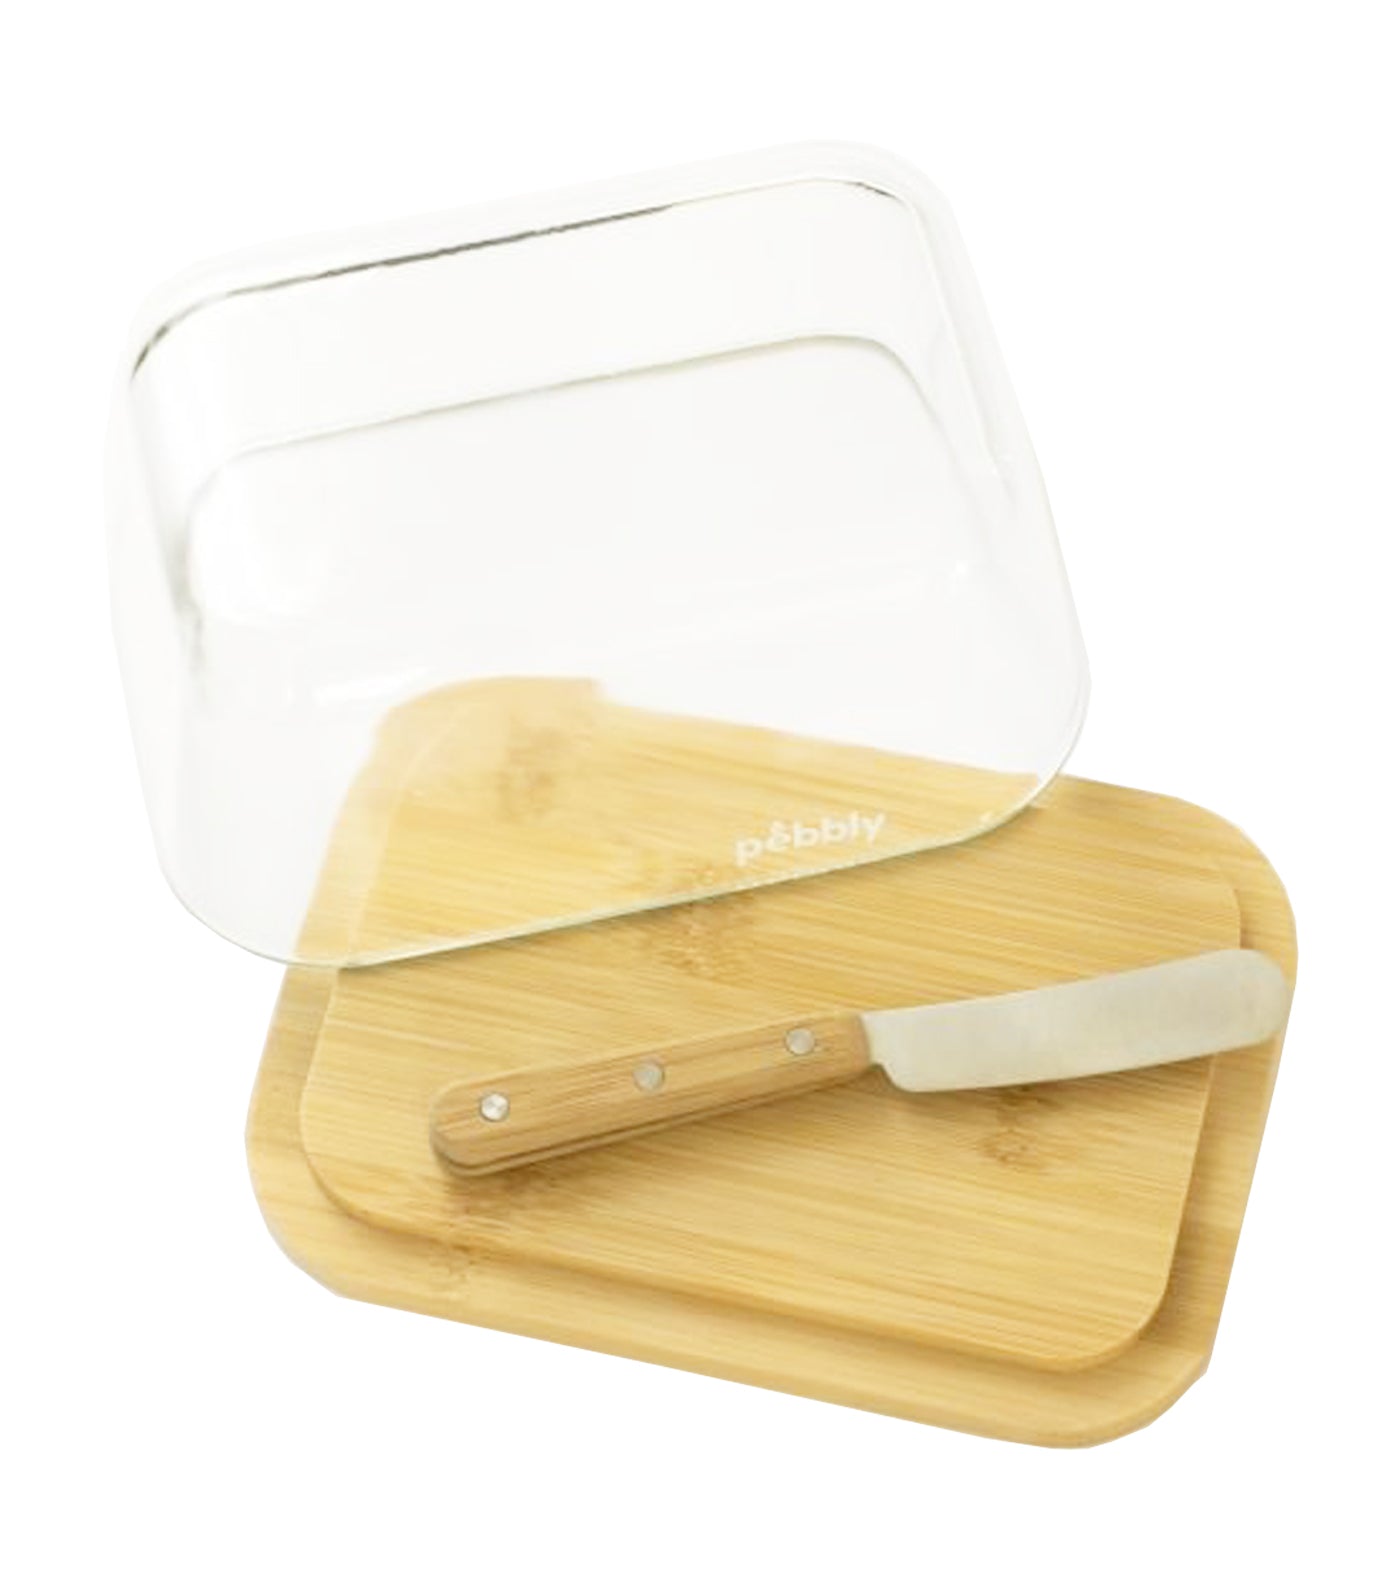 Pebbly Butter Dish Set with Knife